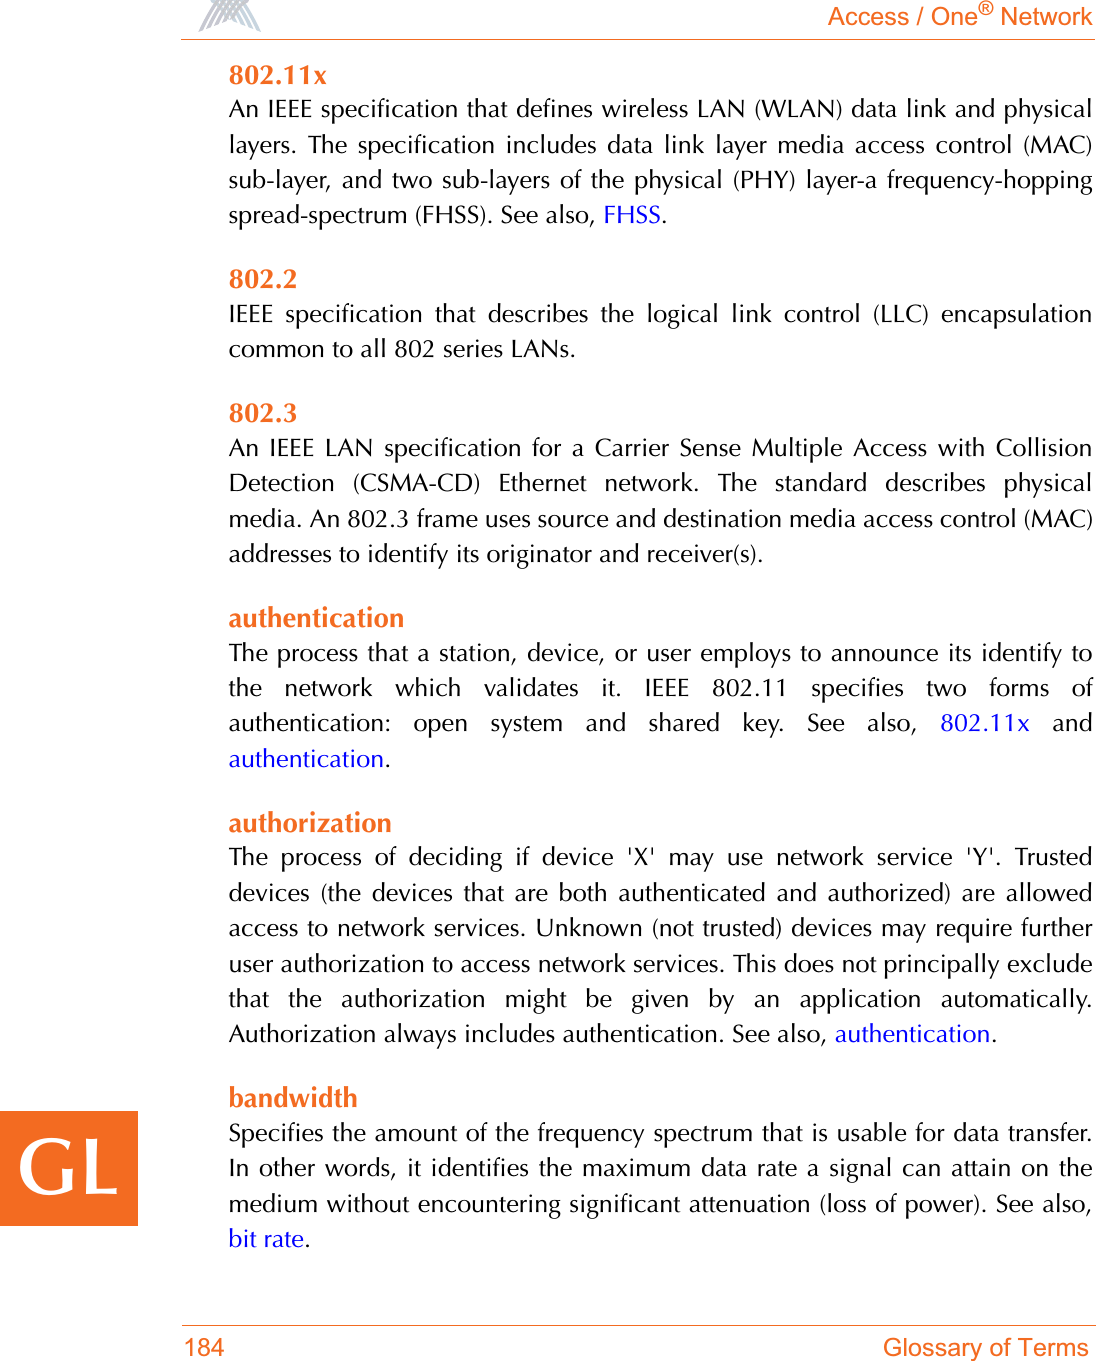 Access / One® Network184 Glossary of TermsGL802.11xAn IEEE specification that defines wireless LAN (WLAN) data link and physicallayers. The specification includes data link layer media access control (MAC)sub-layer, and two sub-layers of the physical (PHY) layer-a frequency-hoppingspread-spectrum (FHSS). See also, FHSS.802.2IEEE specification that describes the logical link control (LLC) encapsulationcommon to all 802 series LANs.802.3An IEEE LAN specification for a Carrier Sense Multiple Access with CollisionDetection (CSMA-CD) Ethernet network. The standard describes physicalmedia. An 802.3 frame uses source and destination media access control (MAC)addresses to identify its originator and receiver(s).authenticationThe process that a station, device, or user employs to announce its identify tothe network which validates it. IEEE 802.11 specifies two forms ofauthentication: open system and shared key. See also, 802.11x andauthentication.authorizationThe process of deciding if device &apos;X&apos; may use network service &apos;Y&apos;. Trusteddevices (the devices that are both authenticated and authorized) are allowedaccess to network services. Unknown (not trusted) devices may require furtheruser authorization to access network services. This does not principally excludethat the authorization might be given by an application automatically.Authorization always includes authentication. See also, authentication.bandwidthSpecifies the amount of the frequency spectrum that is usable for data transfer.In other words, it identifies the maximum data rate a signal can attain on themedium without encountering significant attenuation (loss of power). See also,bit rate.